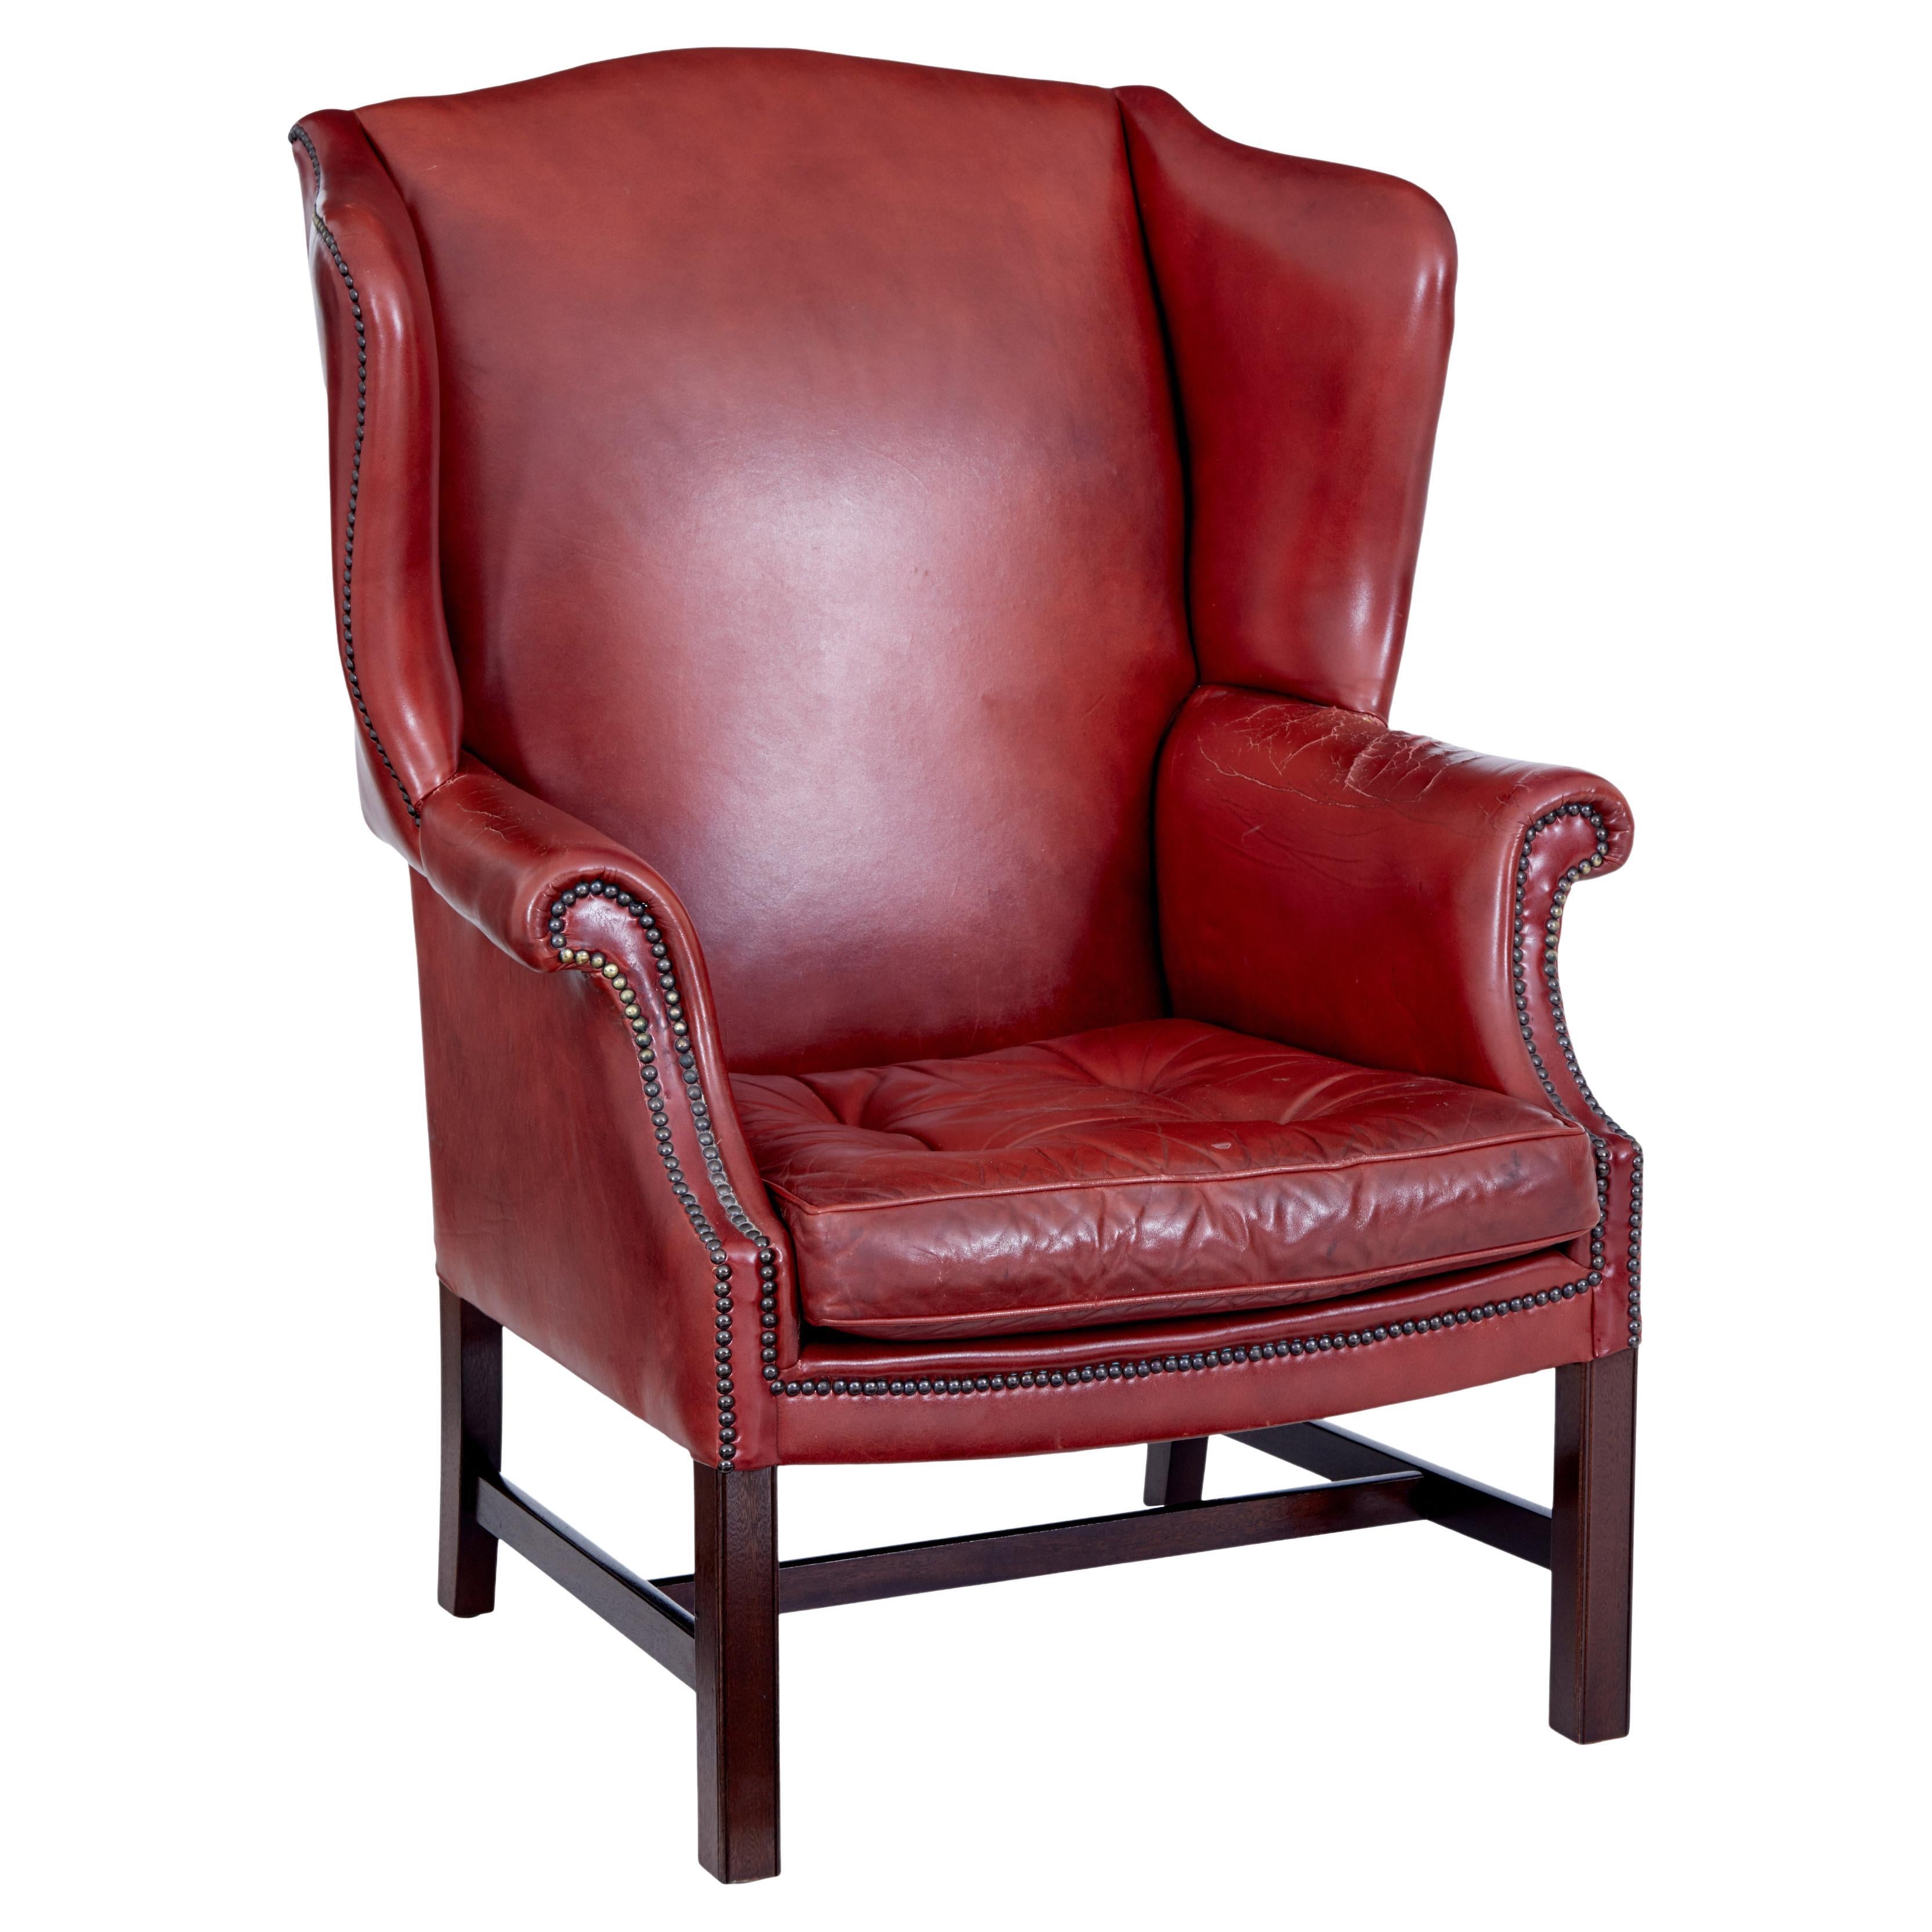 Mid 20th century leather wingback armchair